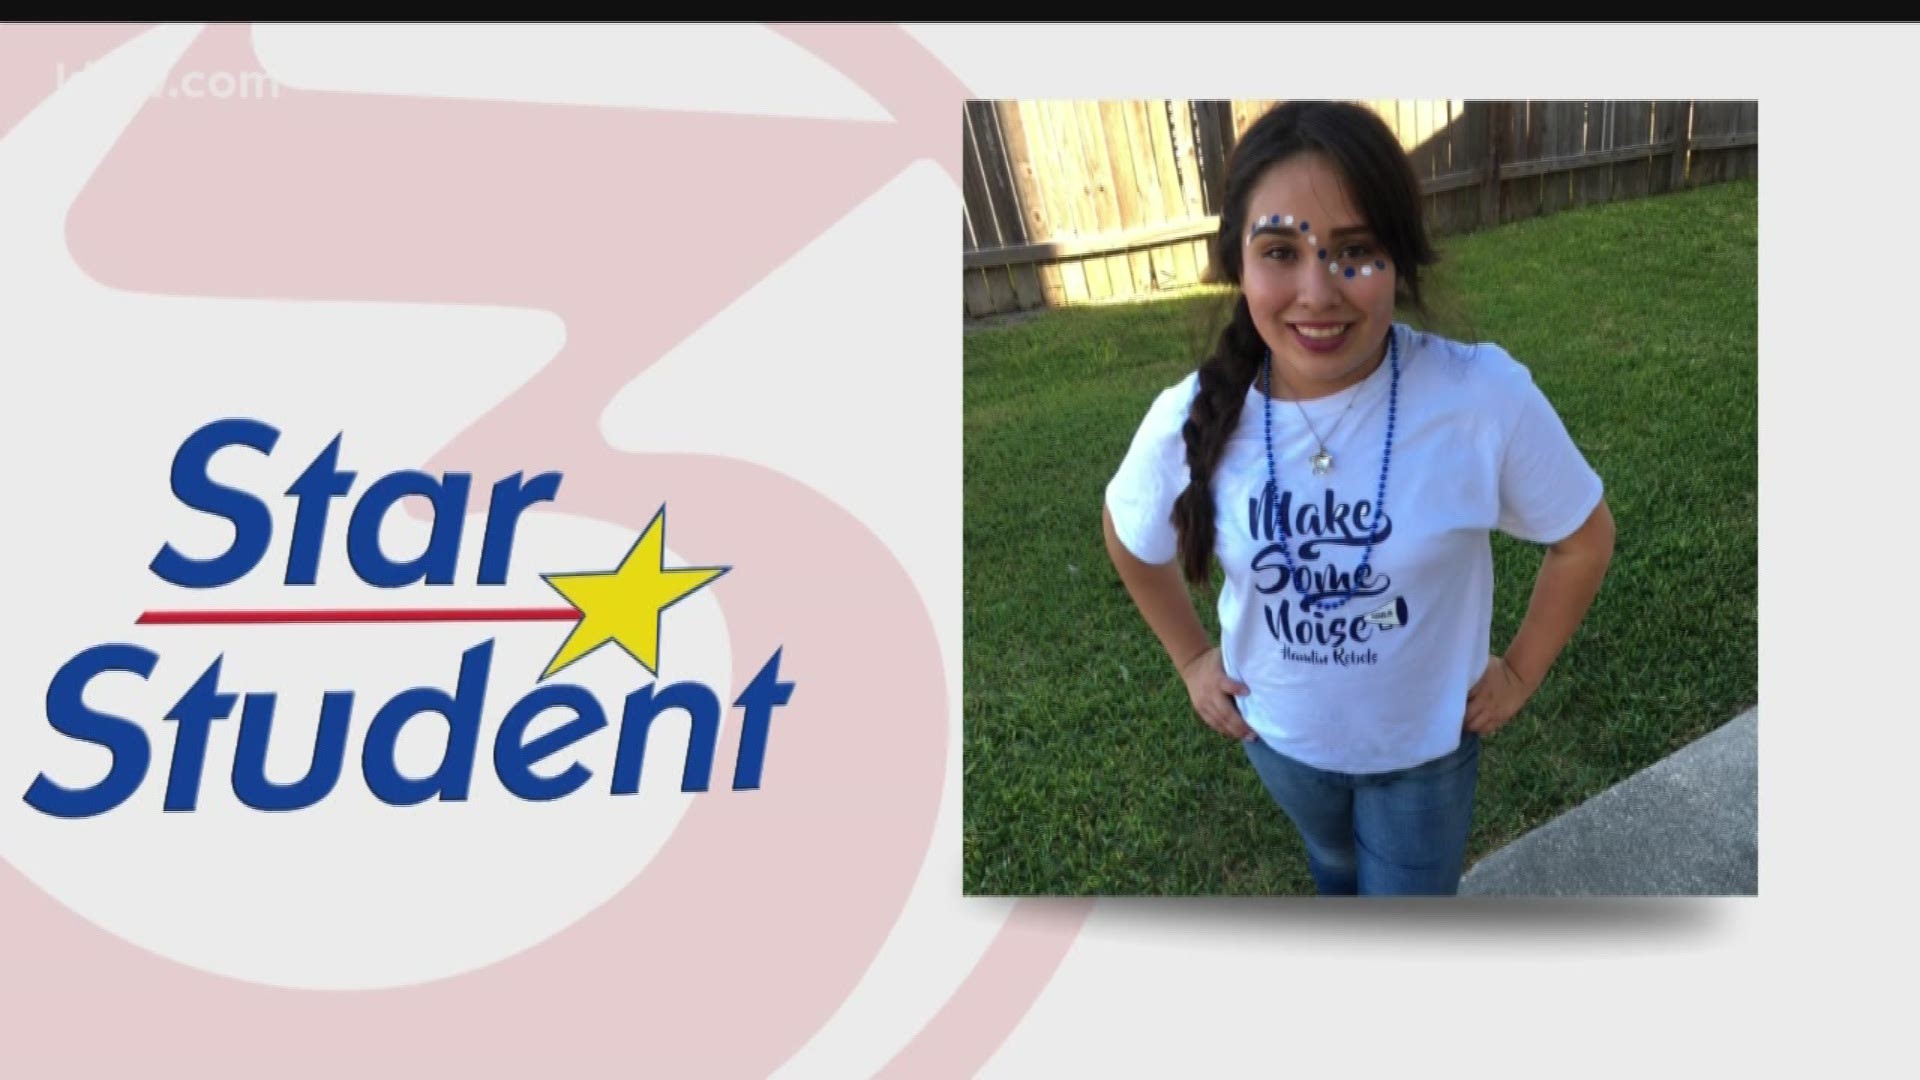 Congratulations to this week's 3 Star Student!